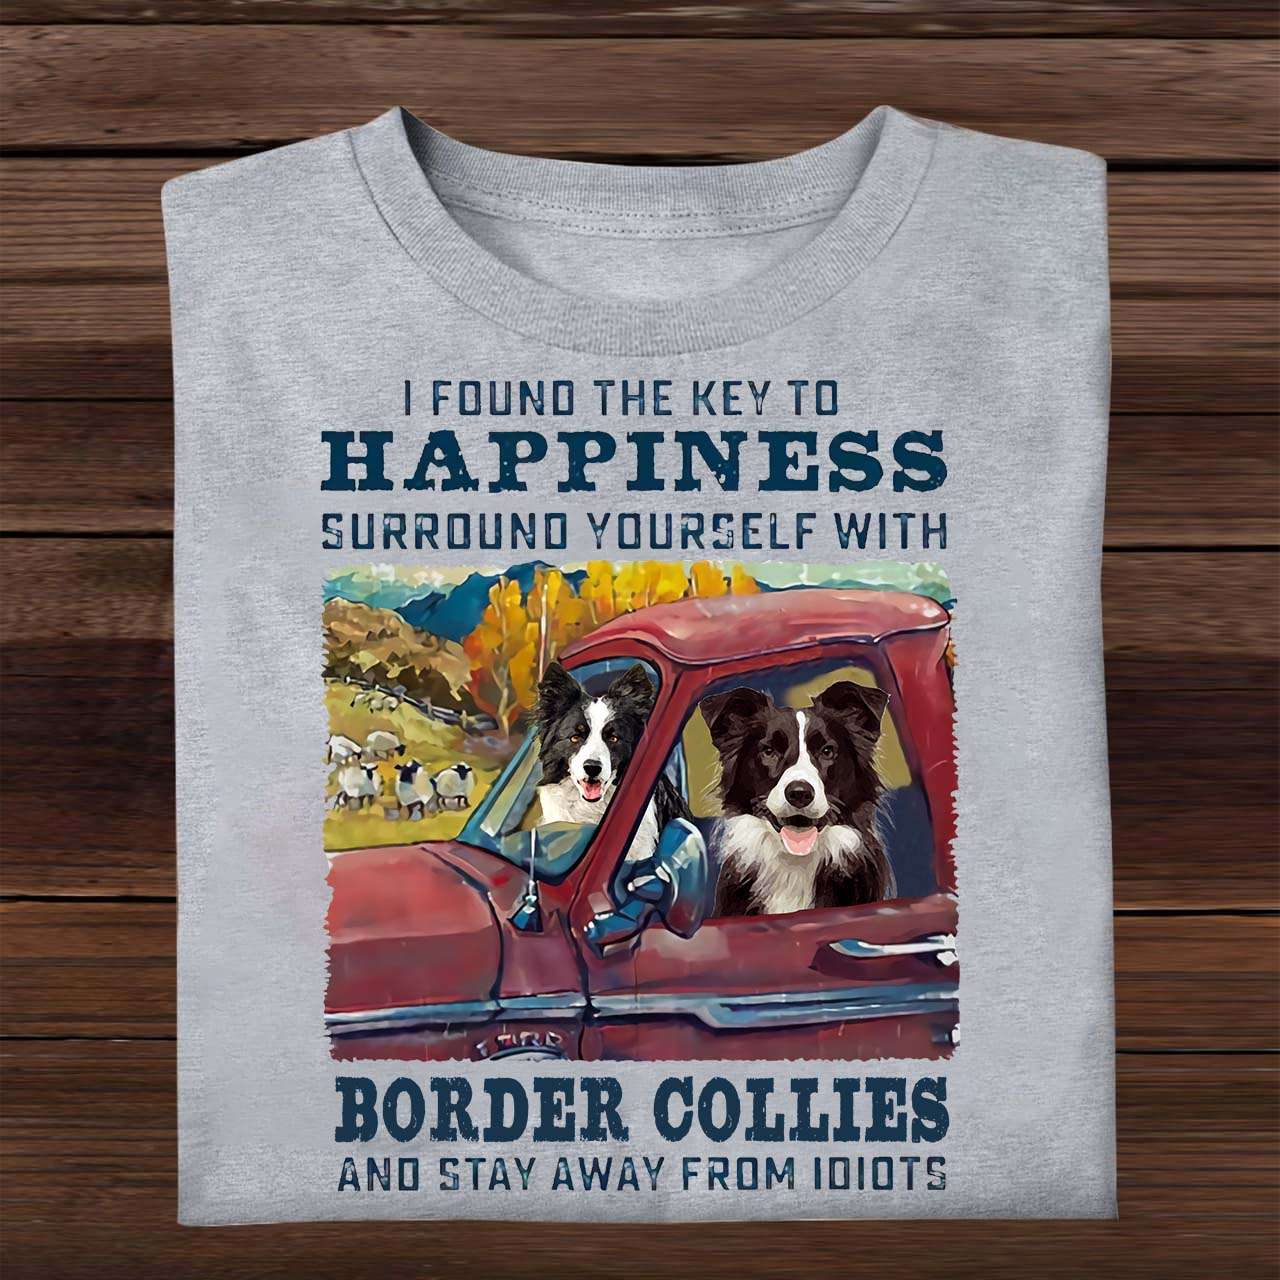 I found the key to happiness surround yourself with Border Collies and stay away from idiots